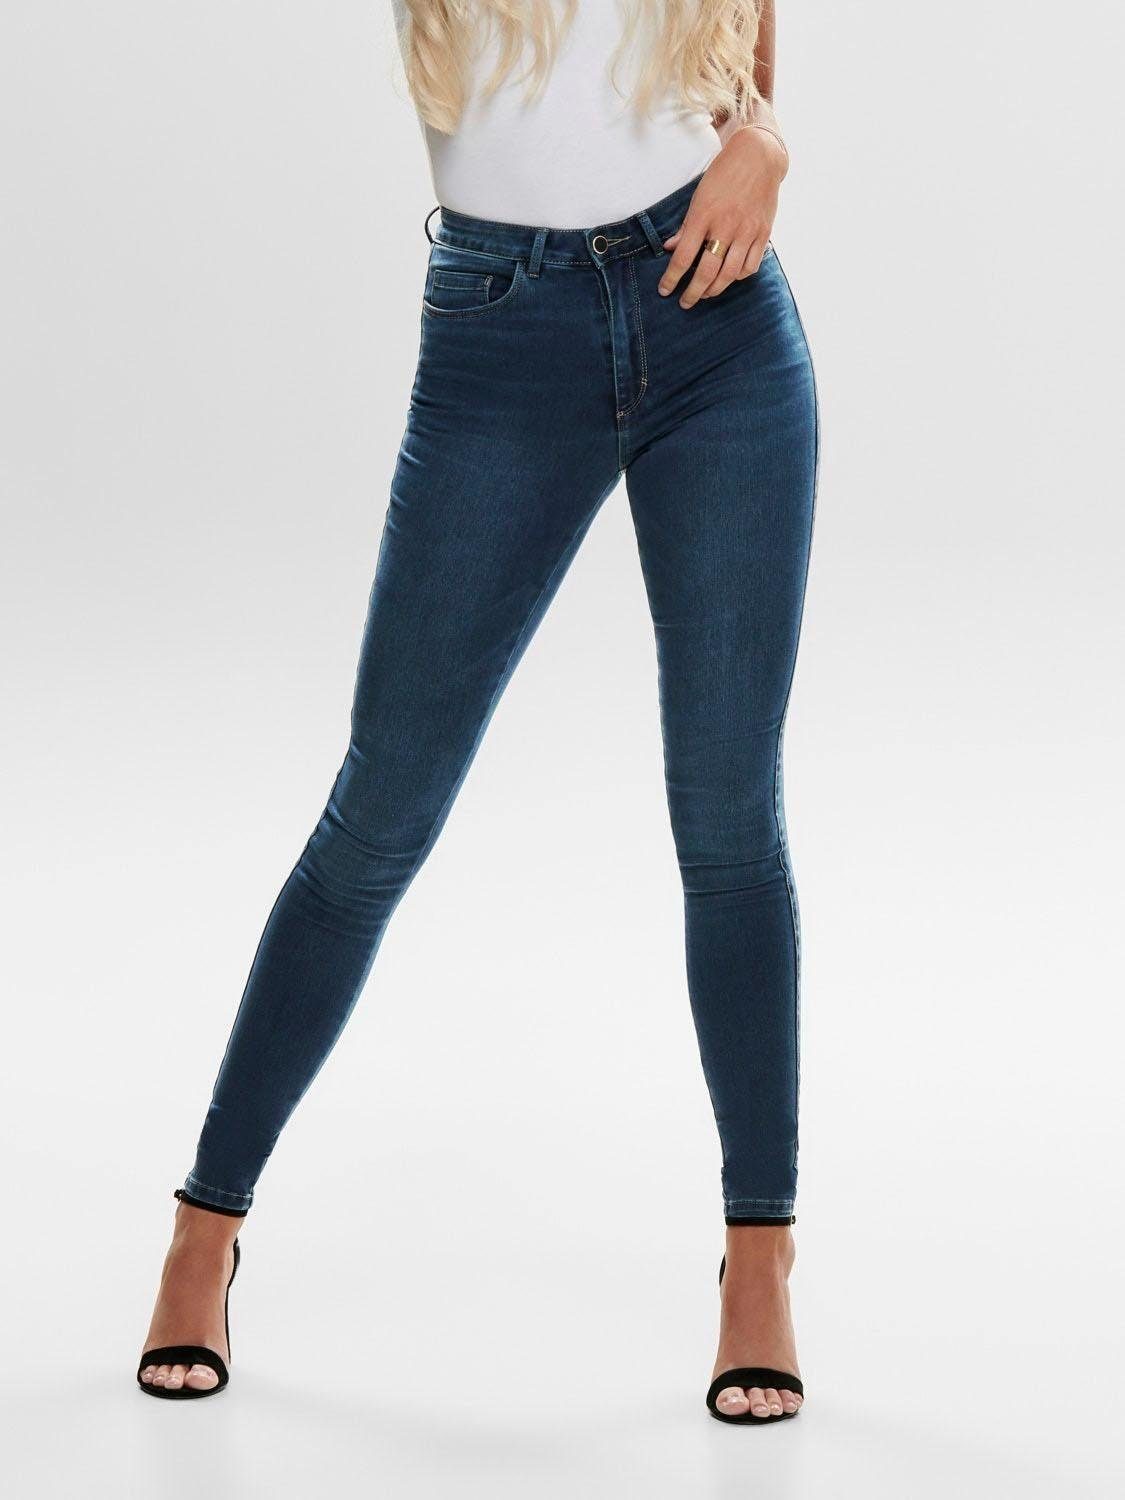 ONLY High-waist-Jeans ONLROYAL, Knackige Skinnyjeans von ONLY